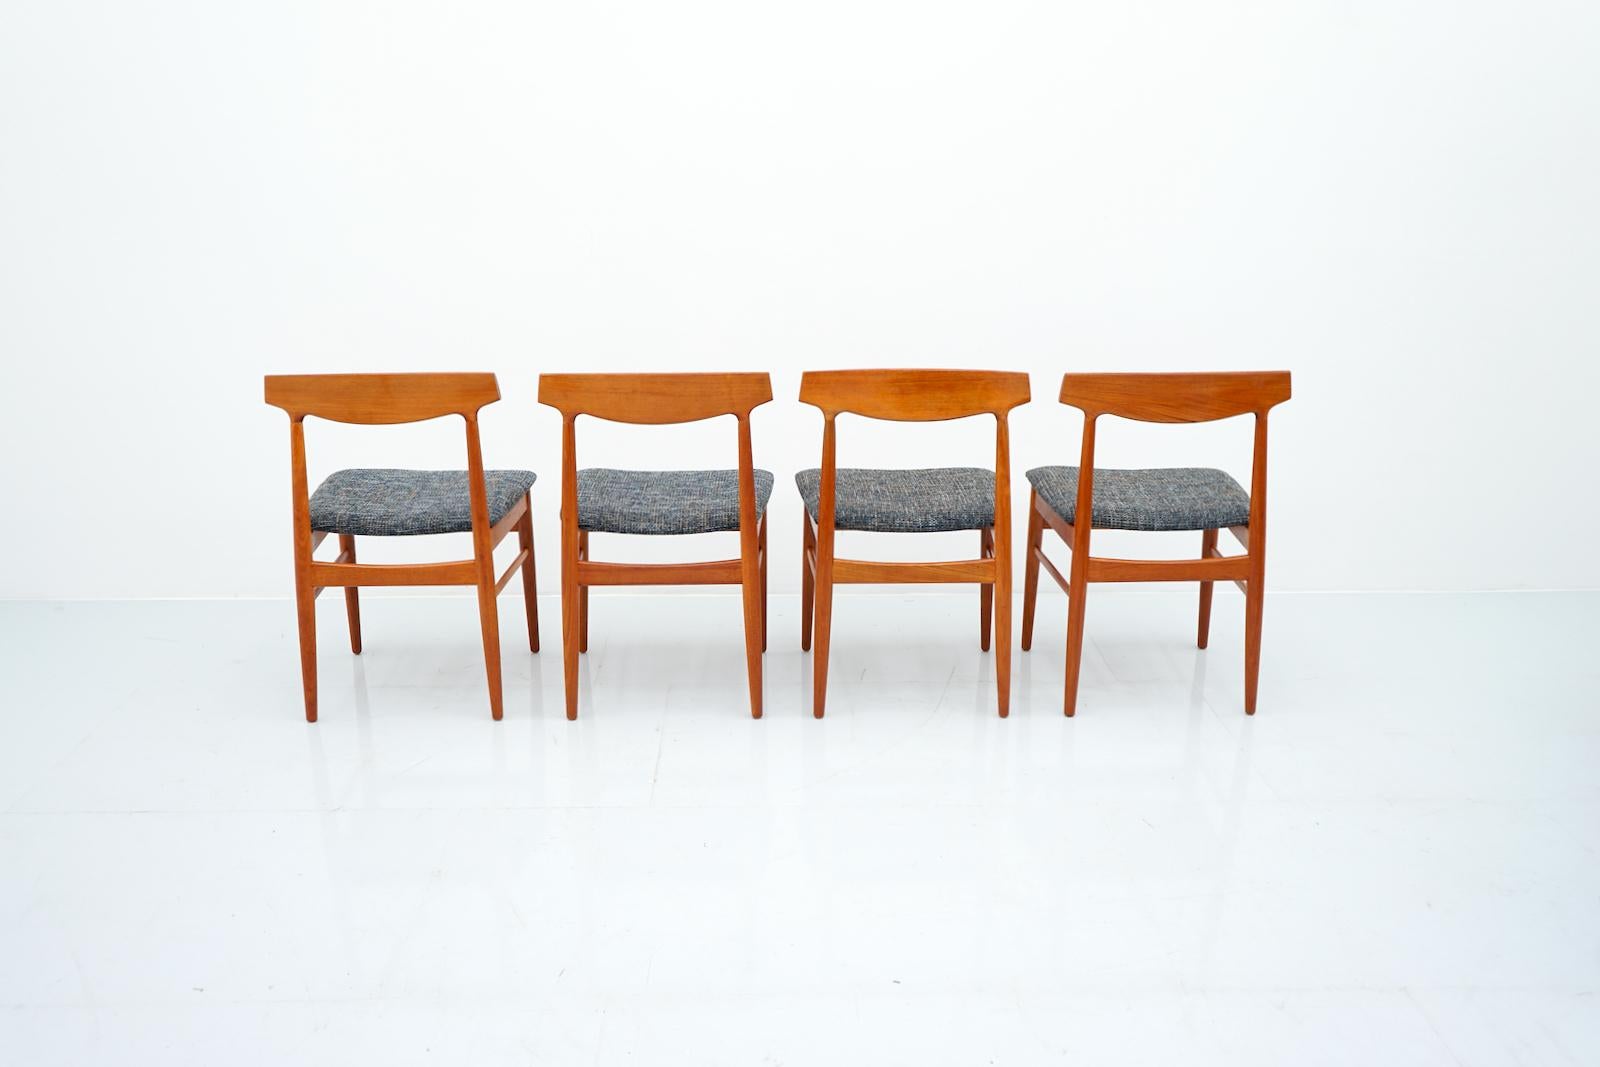 Mid-20th Century Set of Four Teak Wood Dining Chairs Mod. 60 by Henning Kjaernulf, 1960s For Sale